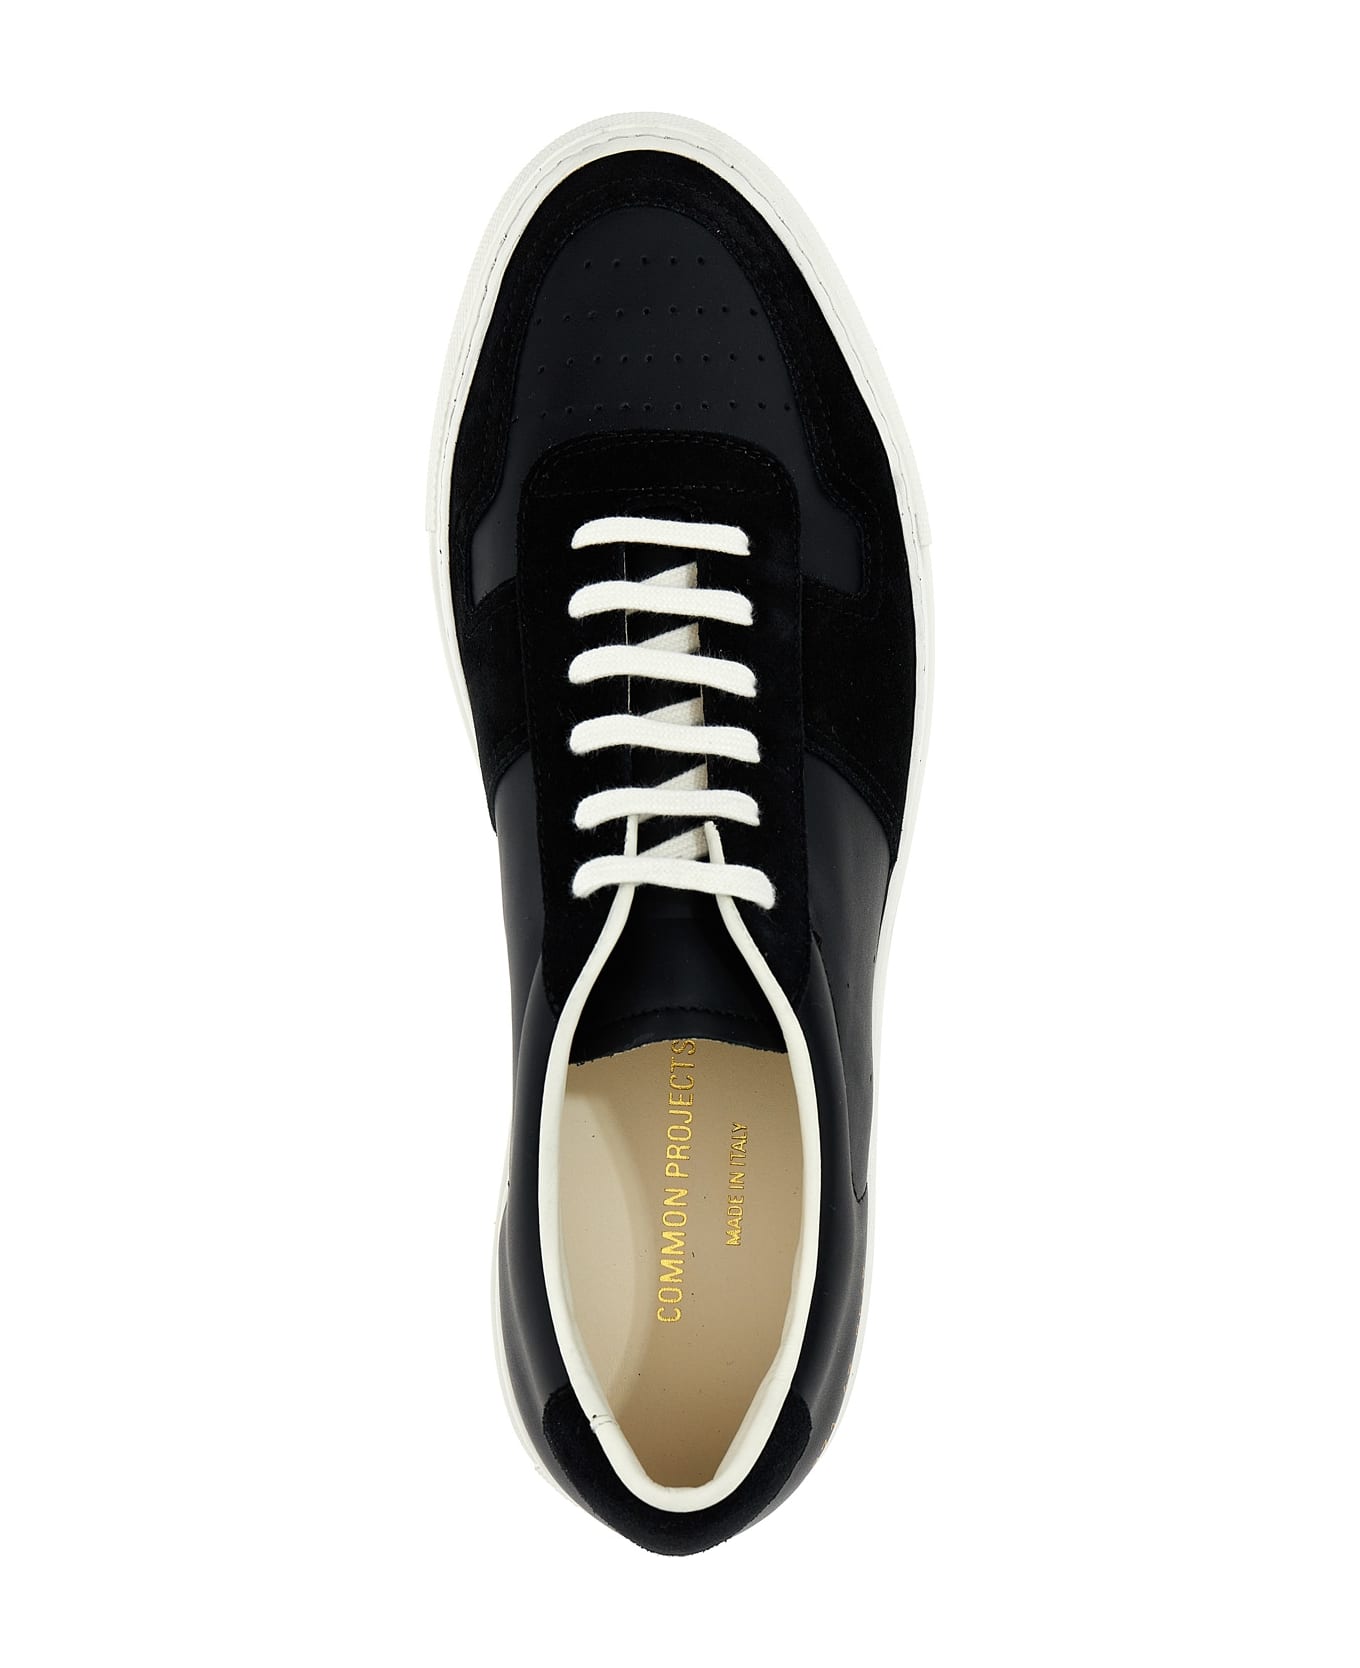 Common Projects Sneakers Bball Low - White/Black スニーカー